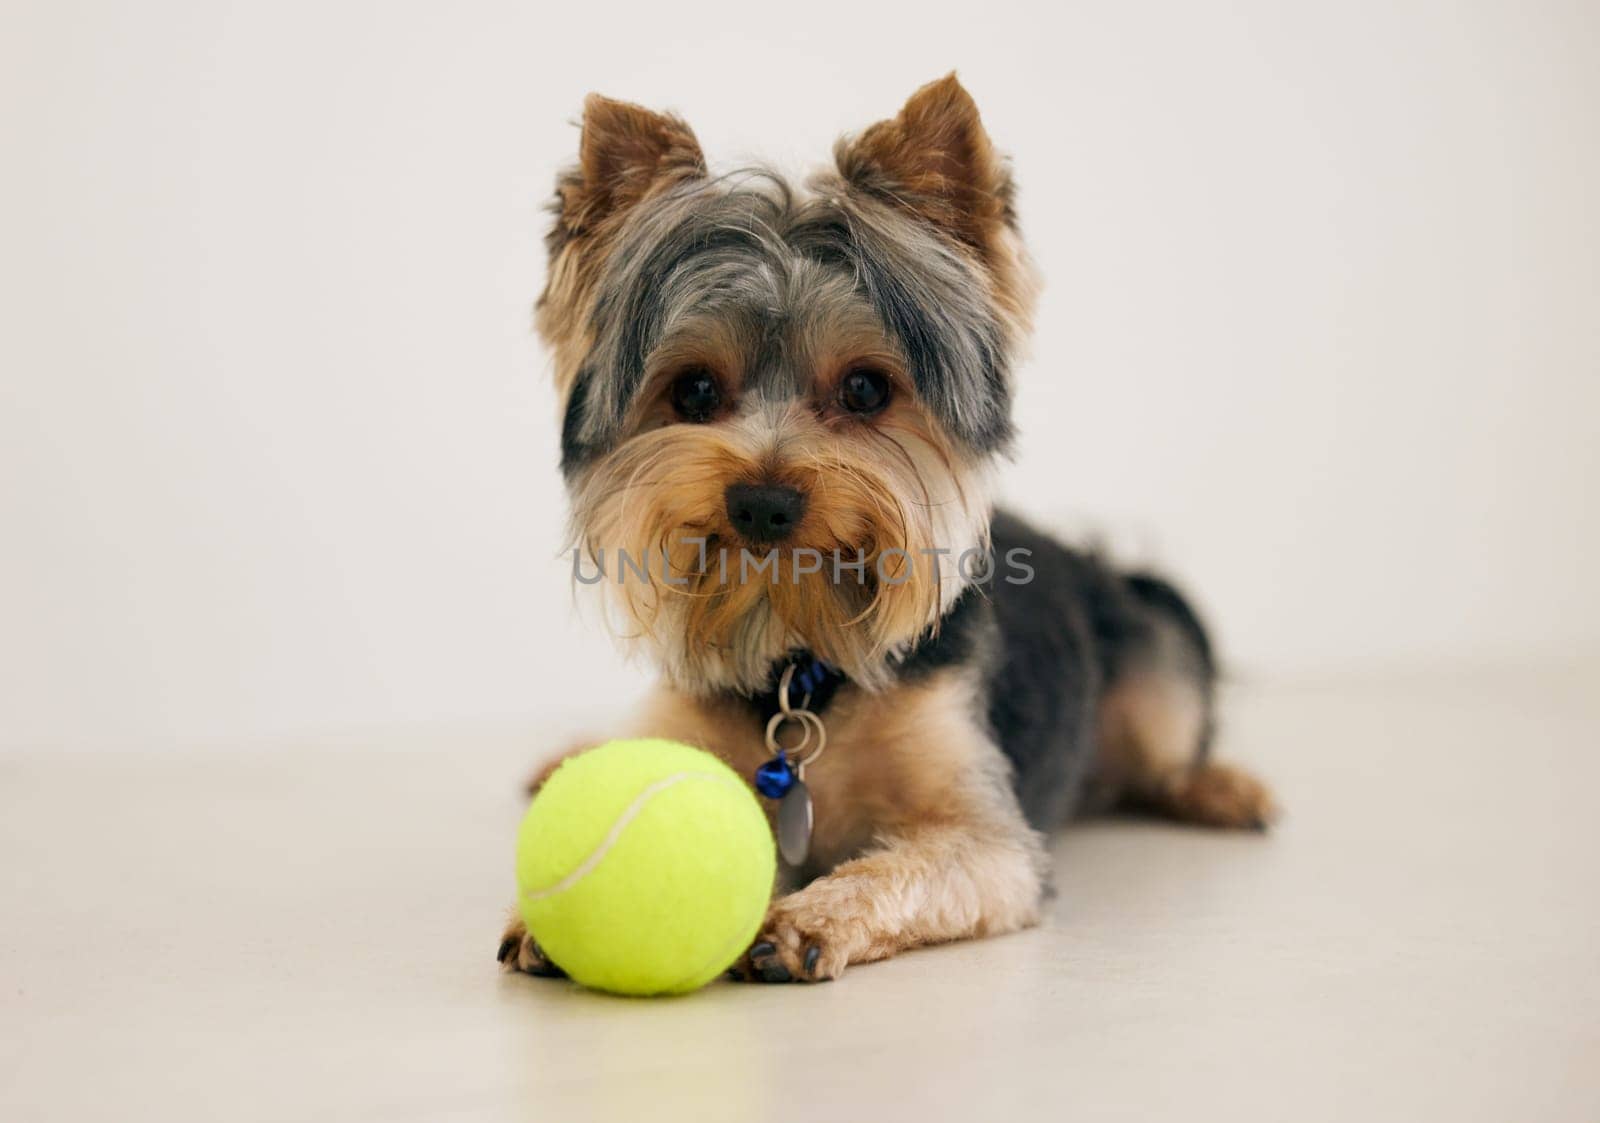 Tennis ball, cute and portrait of dog in studio for playing with sweet and adorable face for fun. Animal, toy and purebred fluffy yorkshire terrier puppy pet with collar isolated by background